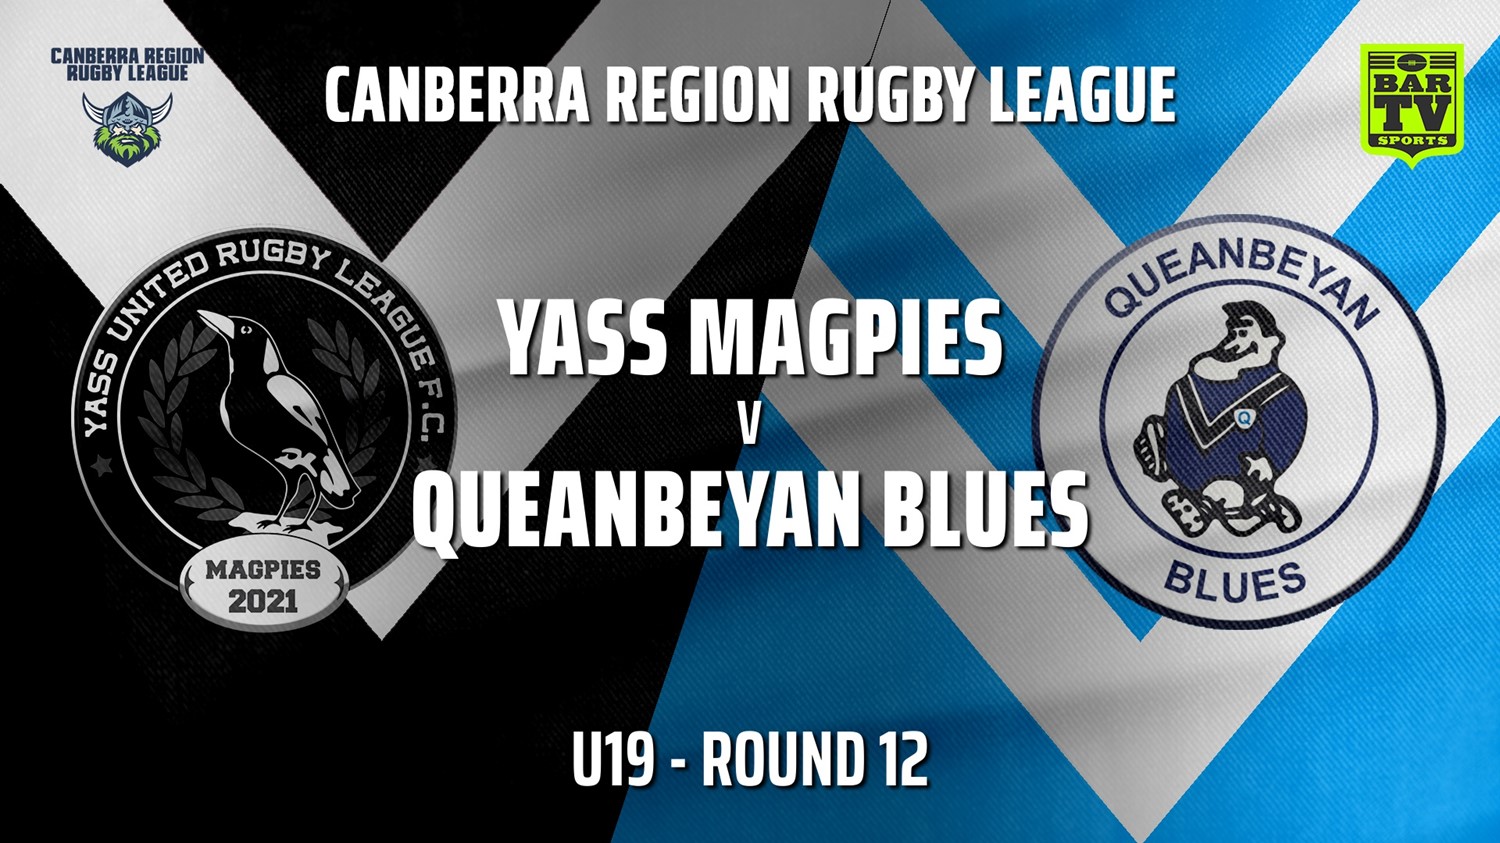 210807-Canberra Round 12 - U19 - Yass Magpies v Queanbeyan Blues Slate Image